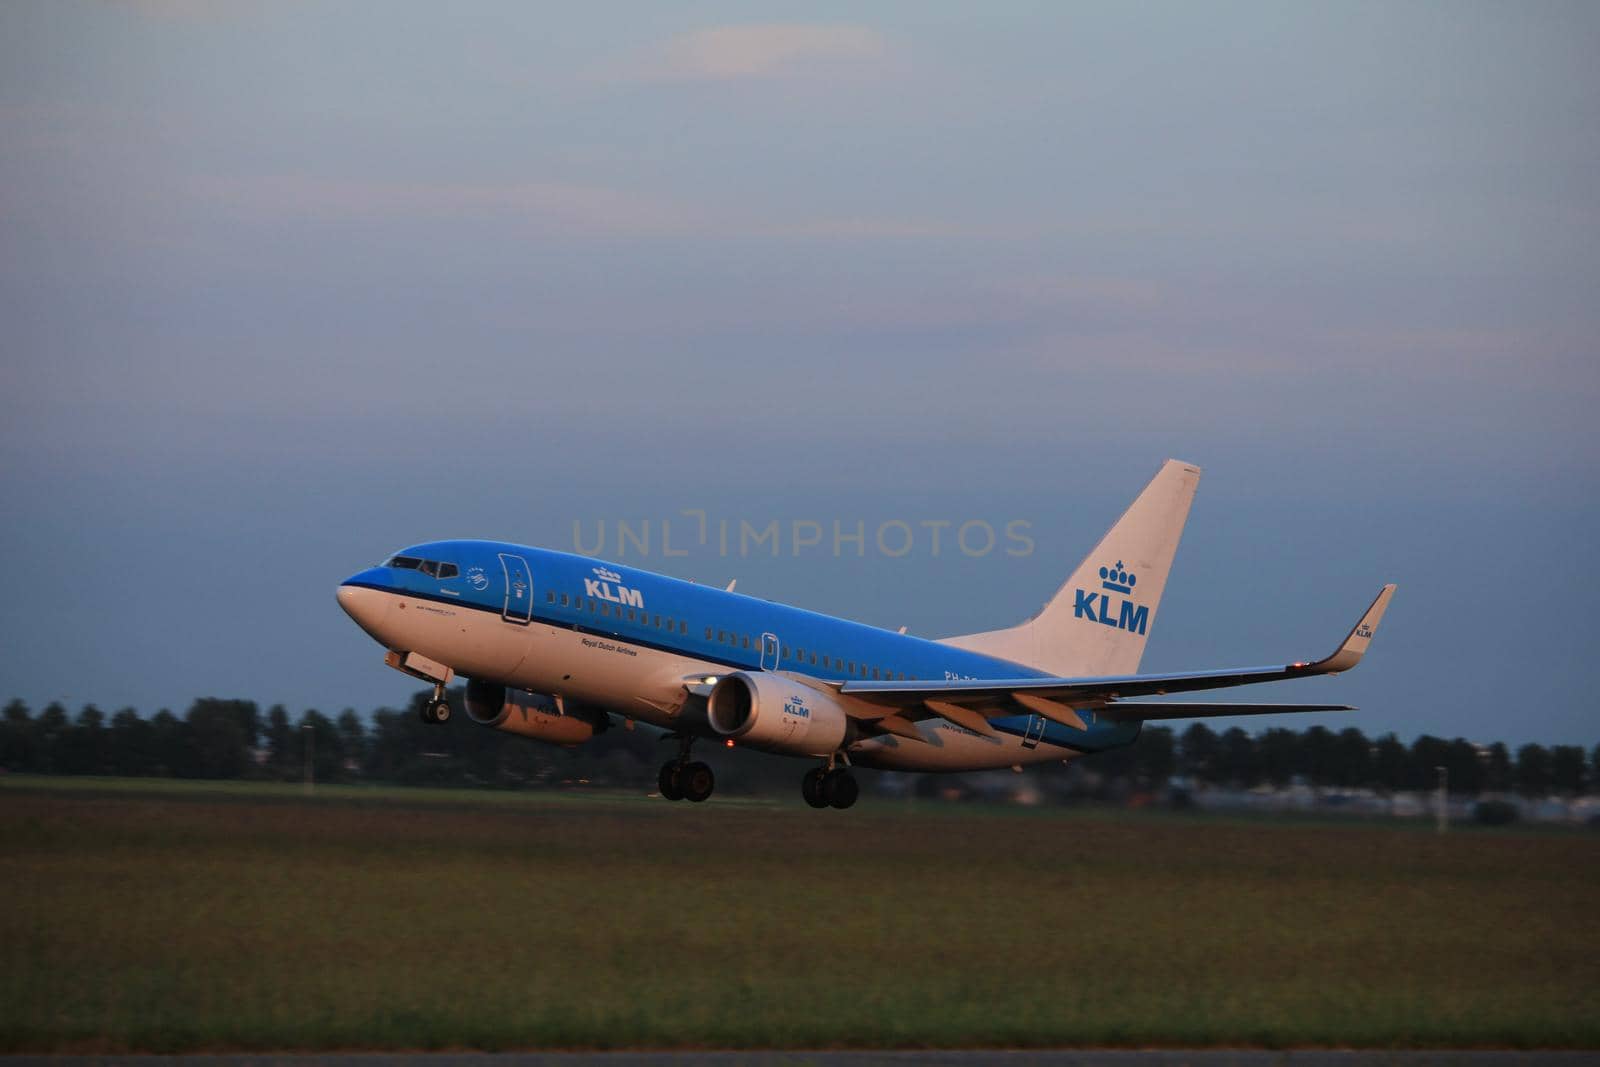 Amsterdam, the Netherlands  - June 1st, 2017: PH-BGQ KLM Royal Dutch Airlines Boeing 737-700 taking off from Polderbaan Runway Amsterdam Airport Schiphol